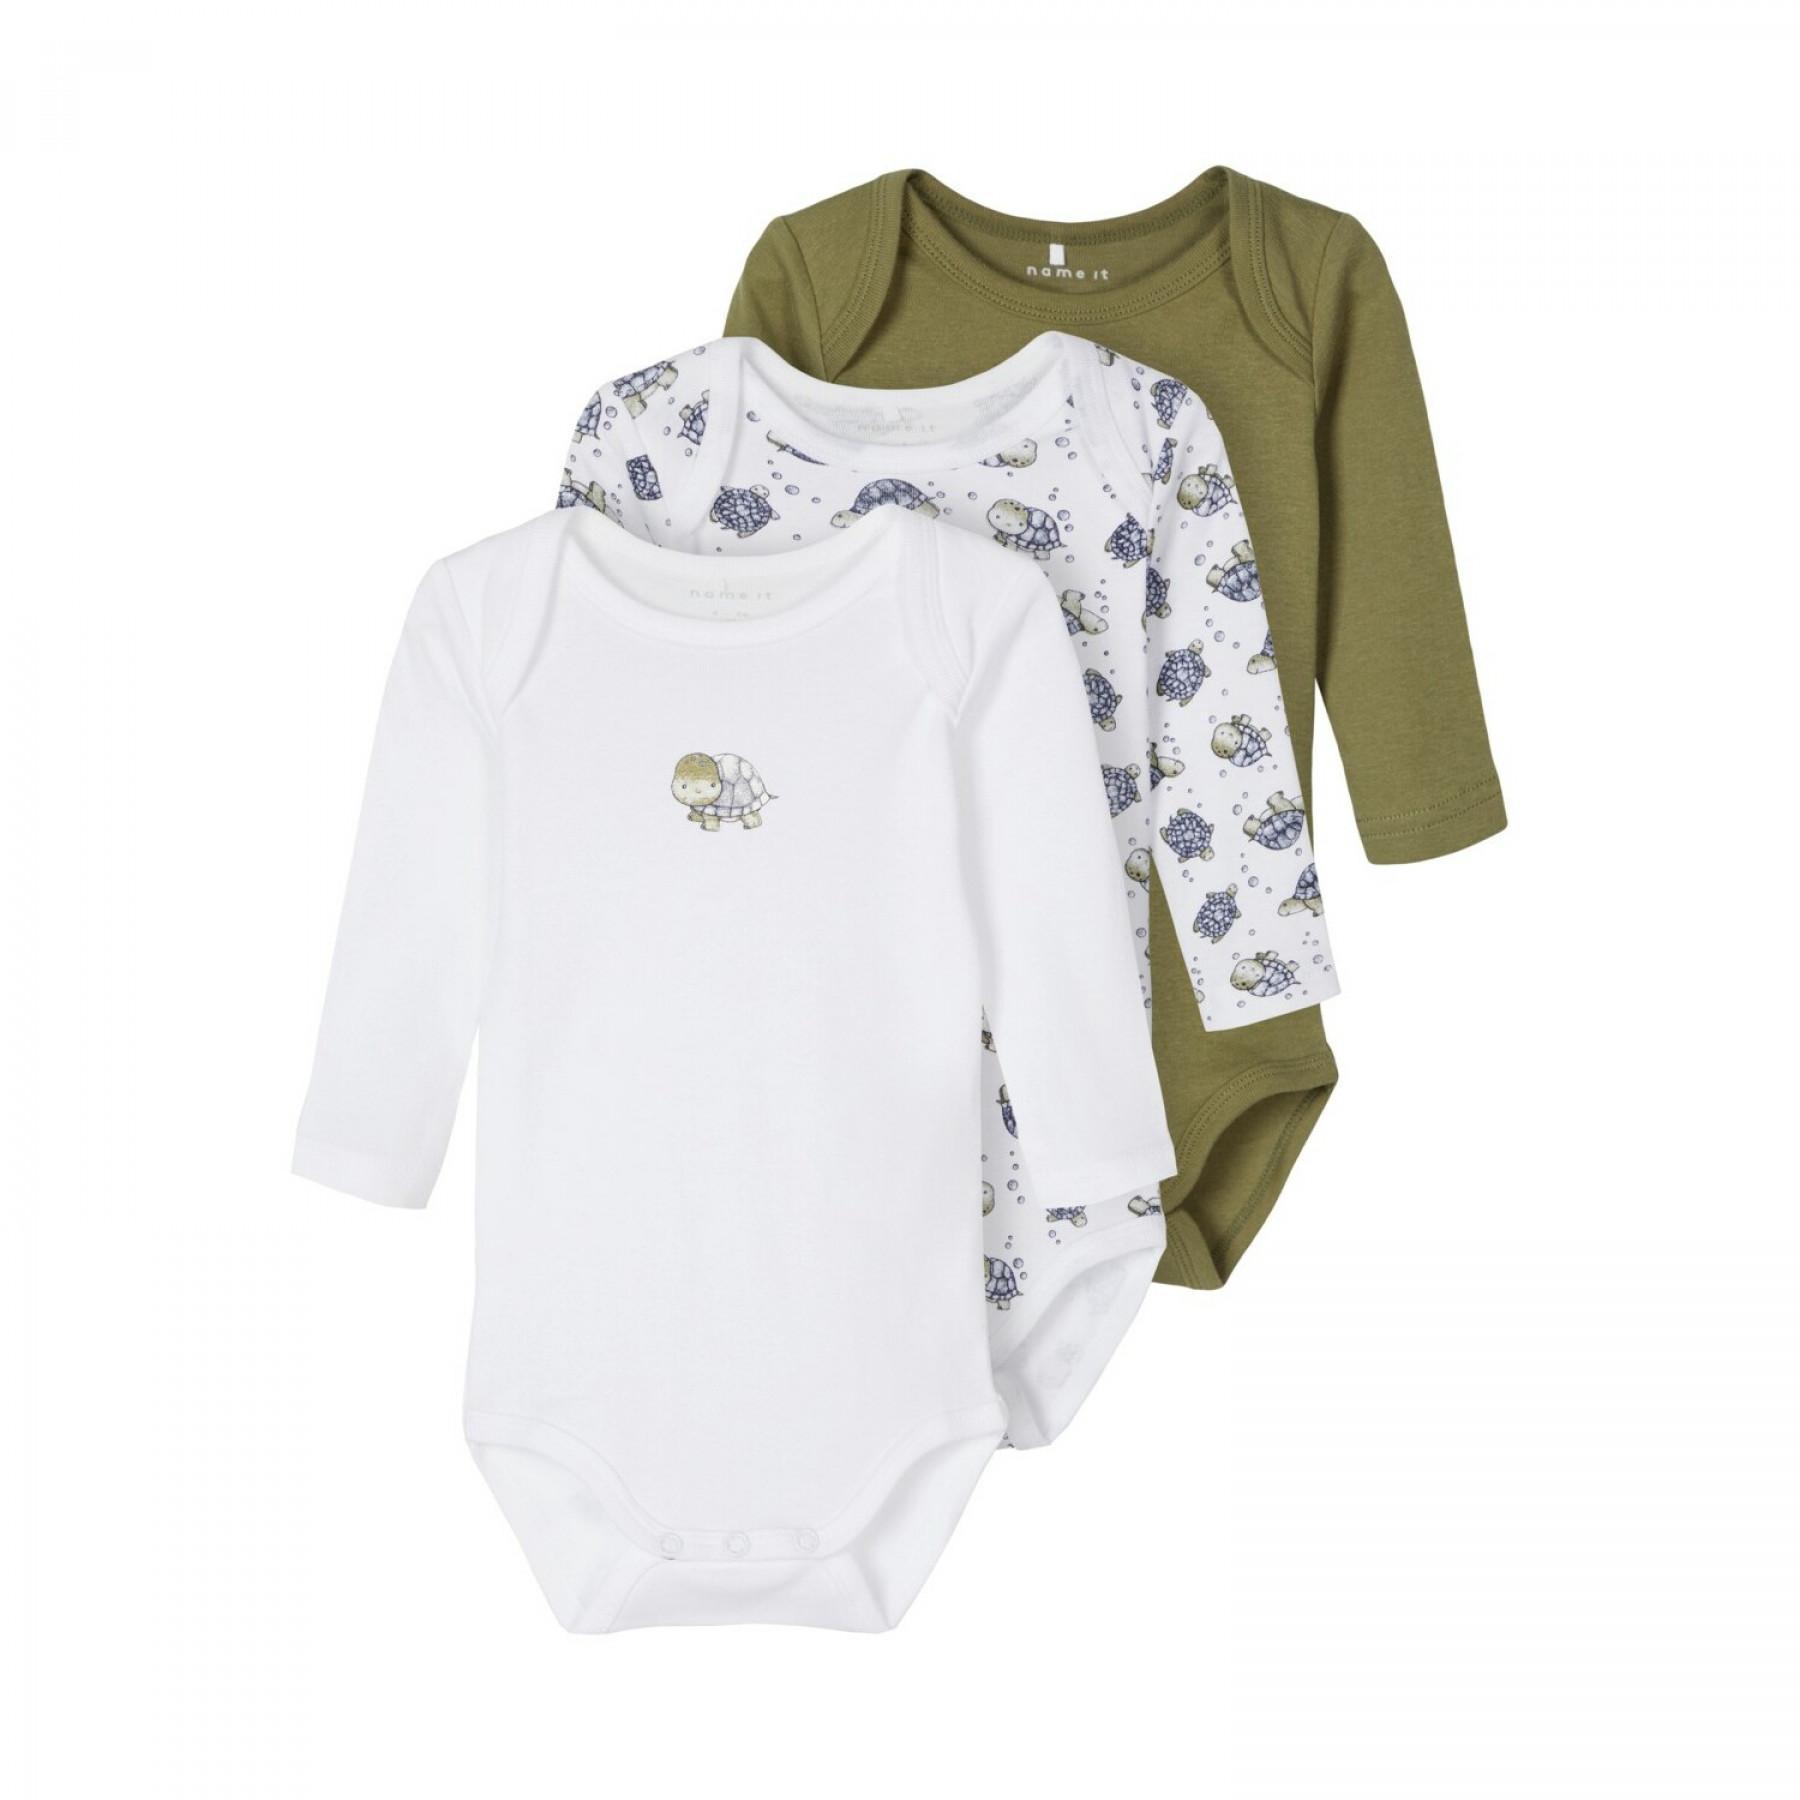 Set of 3 long sleeve baby bodysuits Name it Tortue